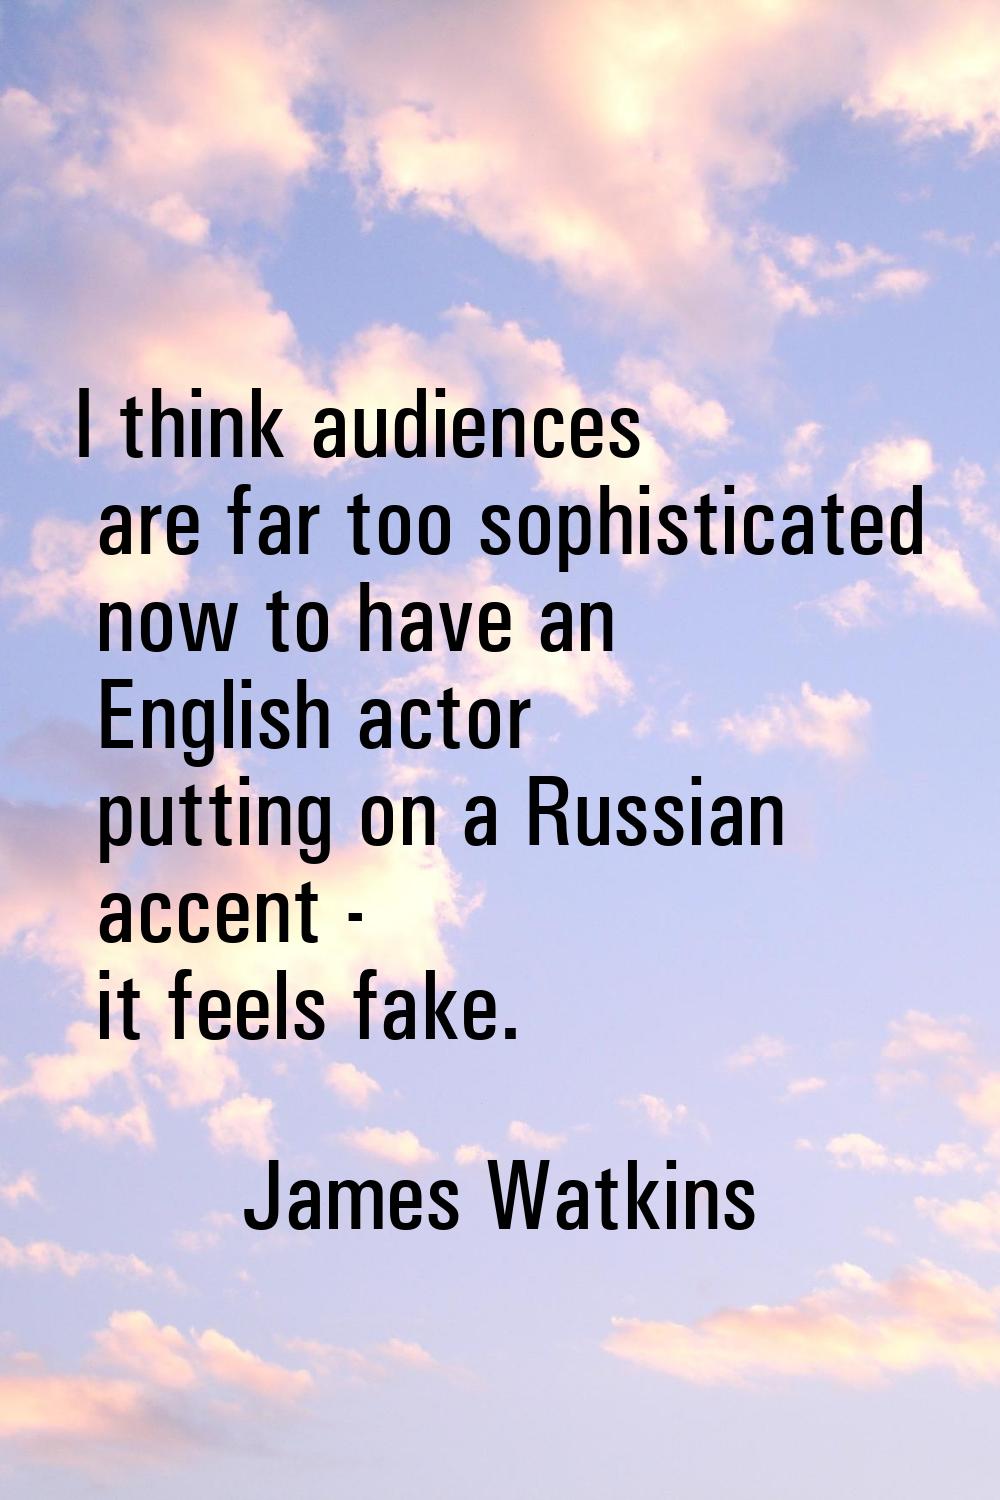 I think audiences are far too sophisticated now to have an English actor putting on a Russian accen